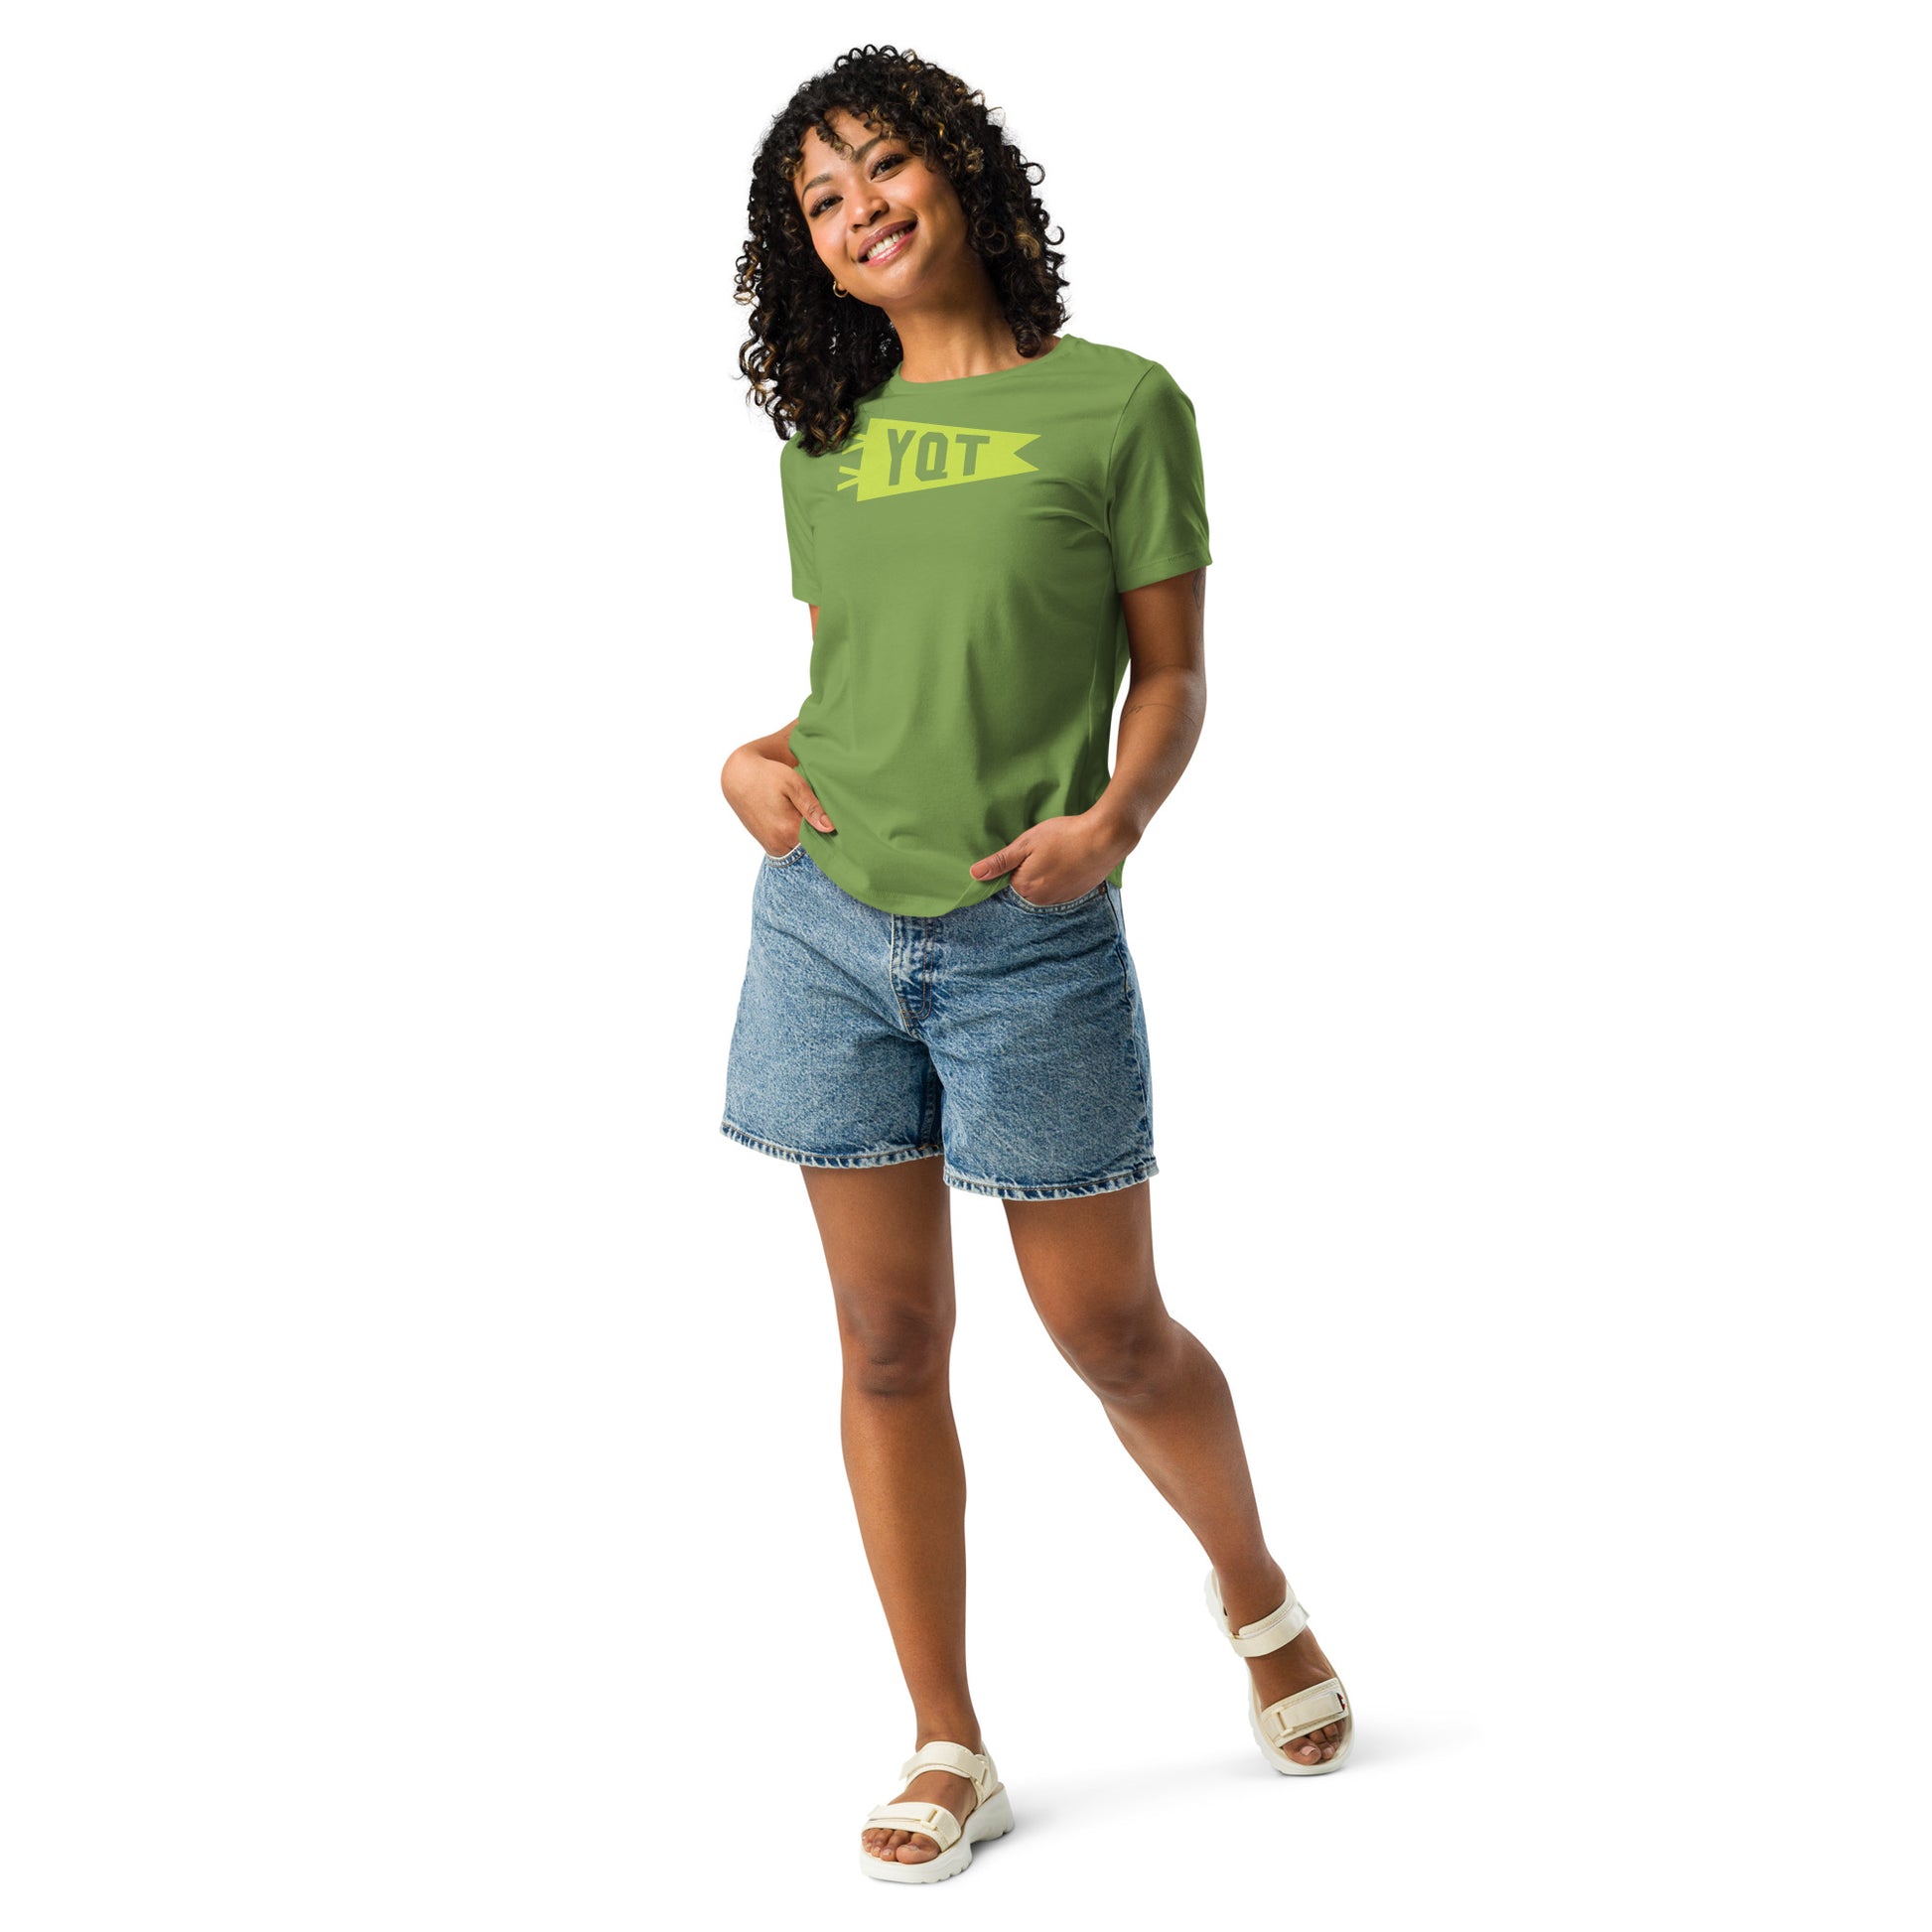 Airport Code Women's Tee - Green Graphic • YQT Thunder Bay • YHM Designs - Image 08